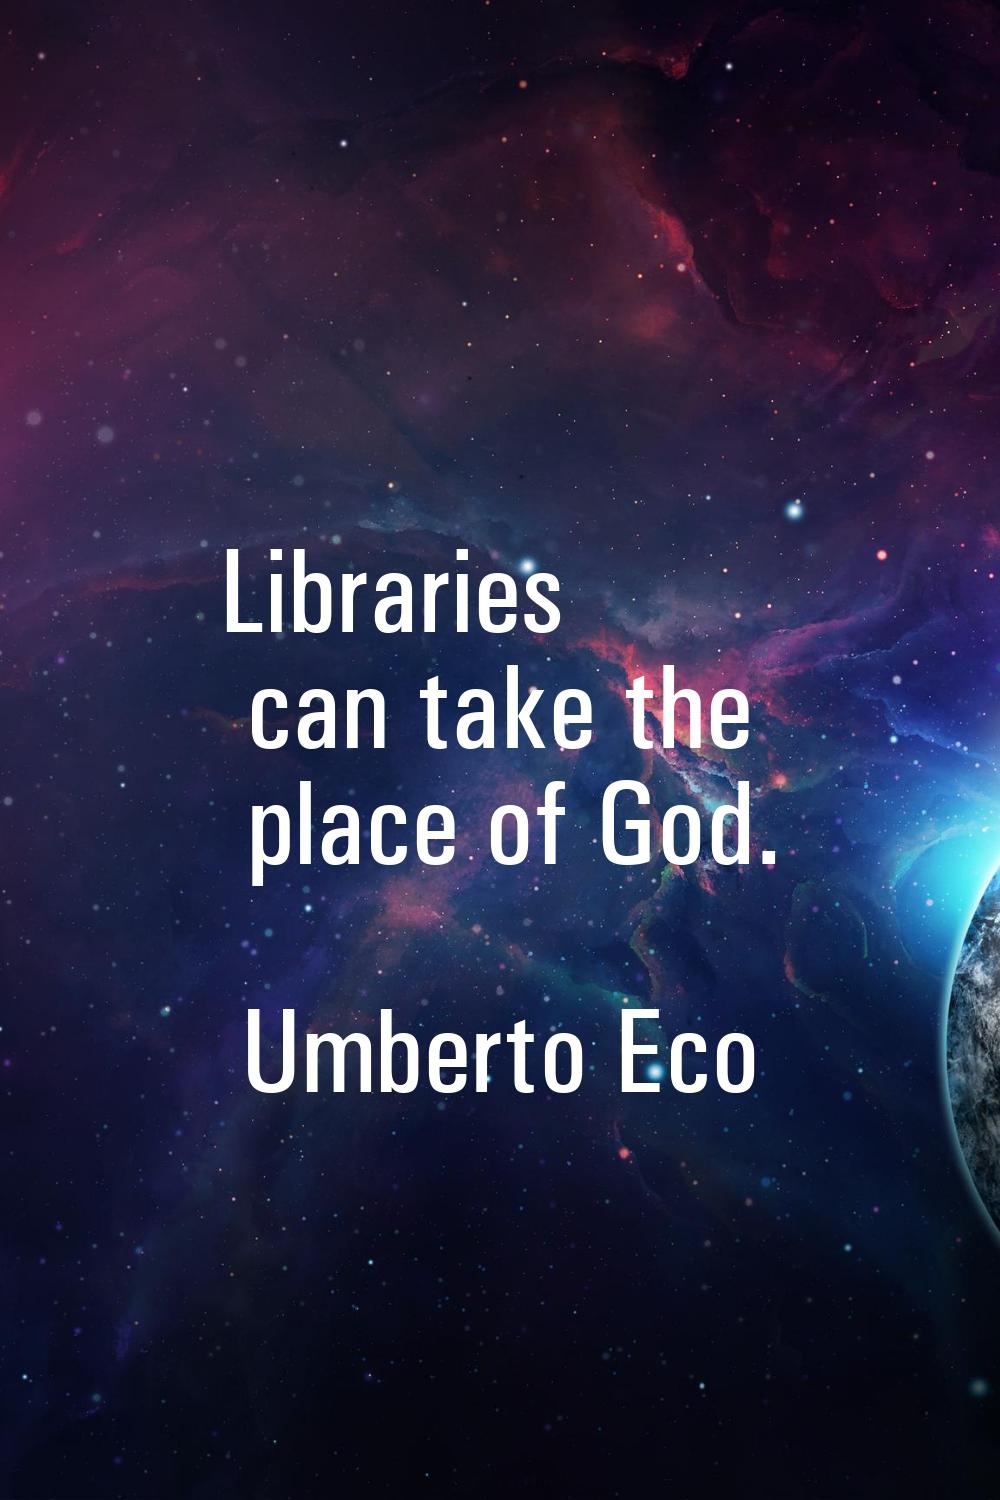 Libraries can take the place of God.